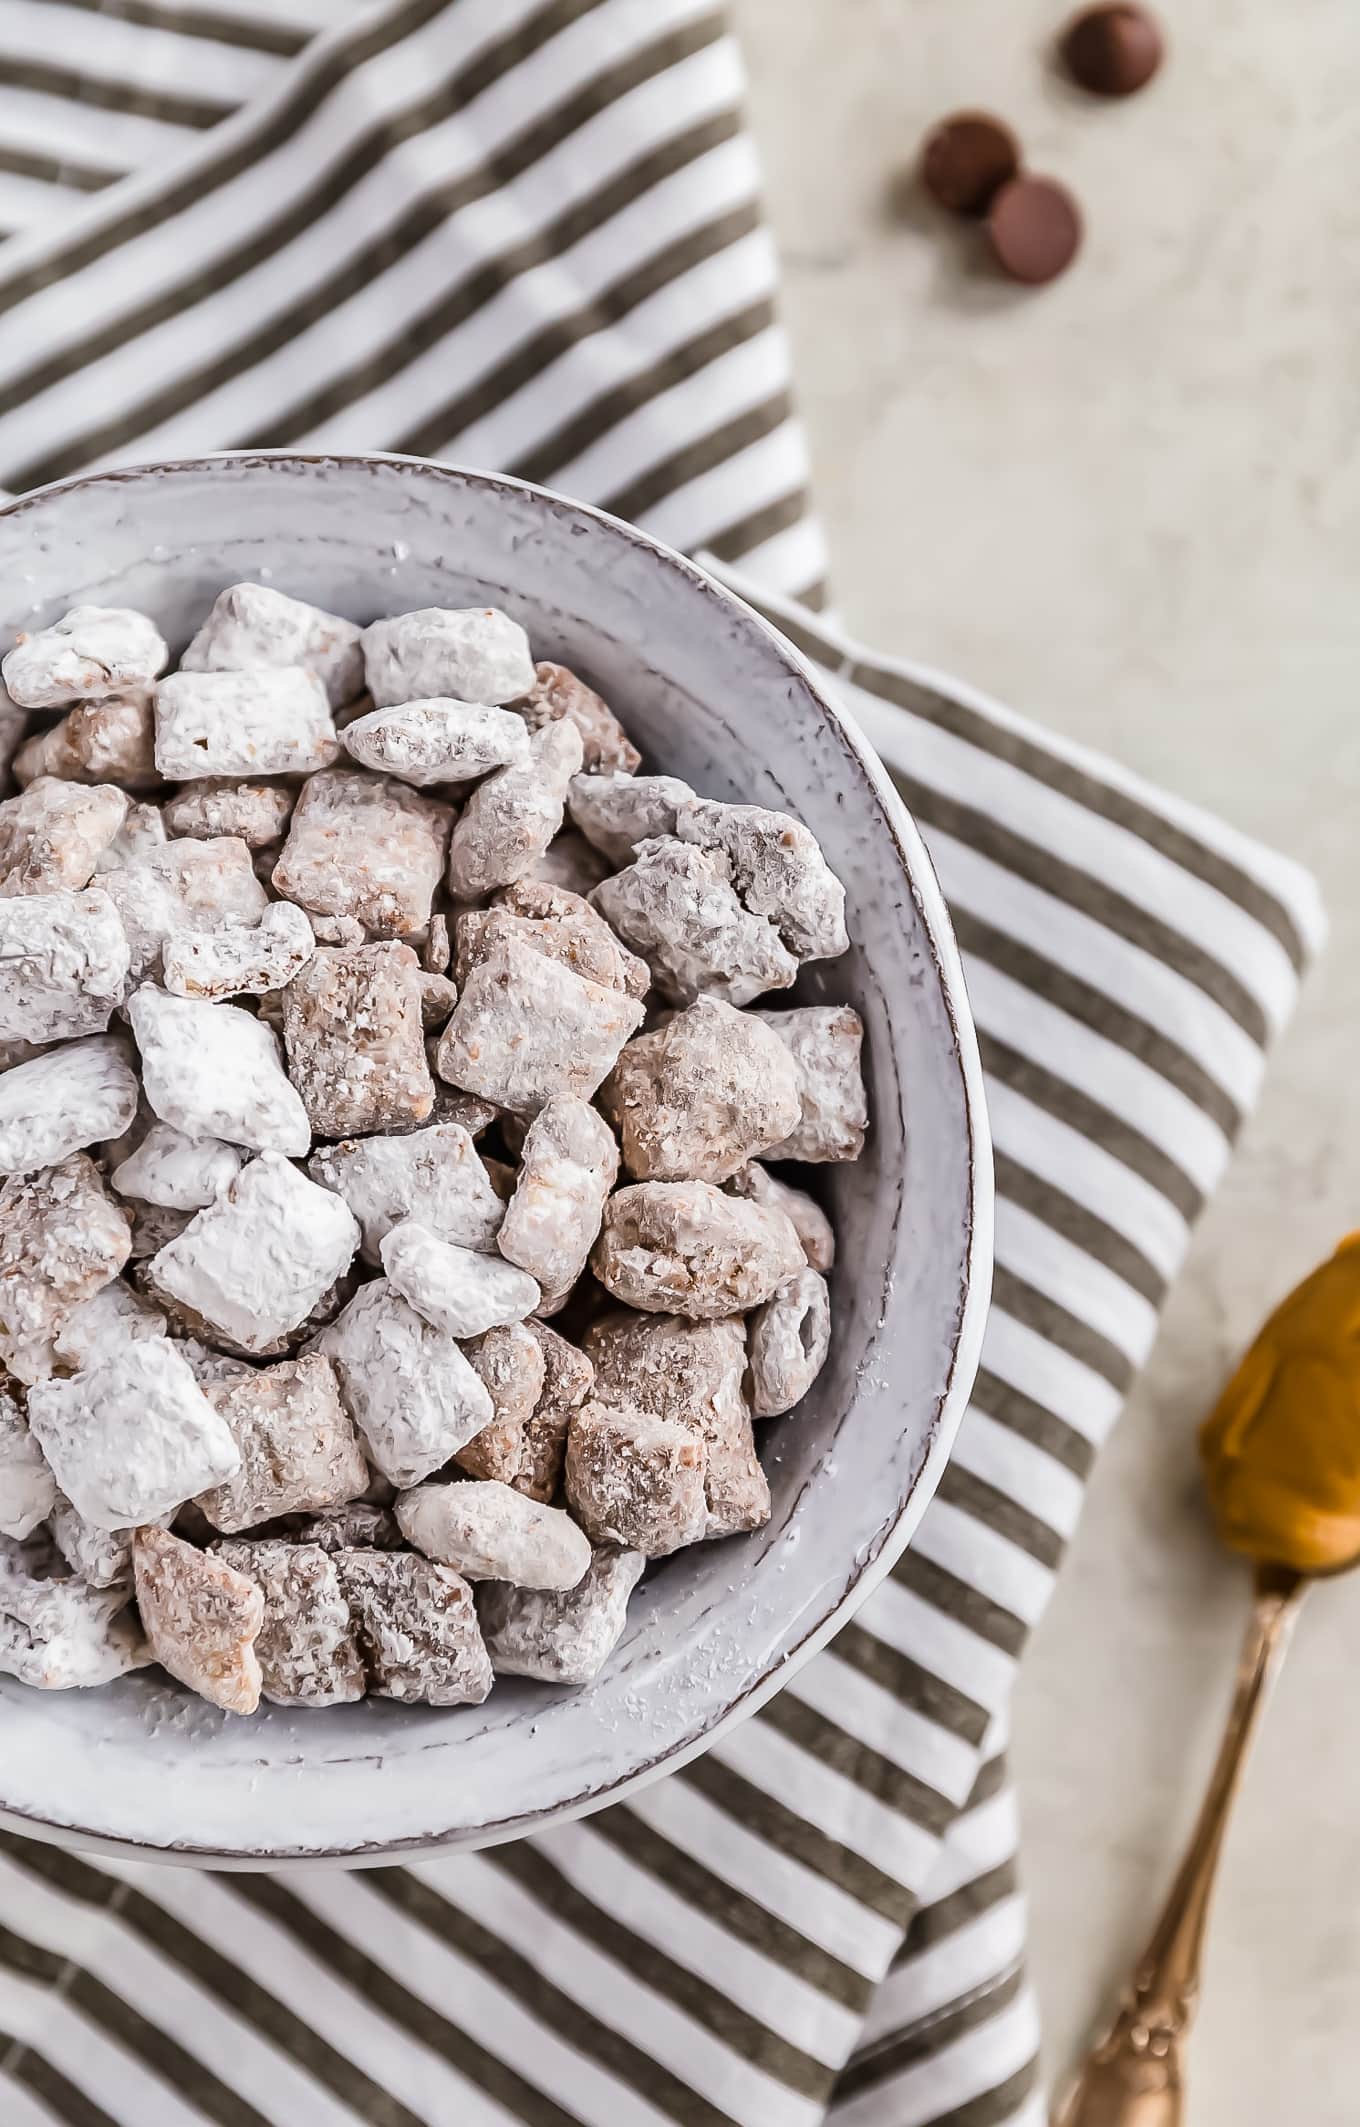 Best Puppy Chow Recipe Original Mint Versions The Cookie Rookie,How Often Do Puppies Poop